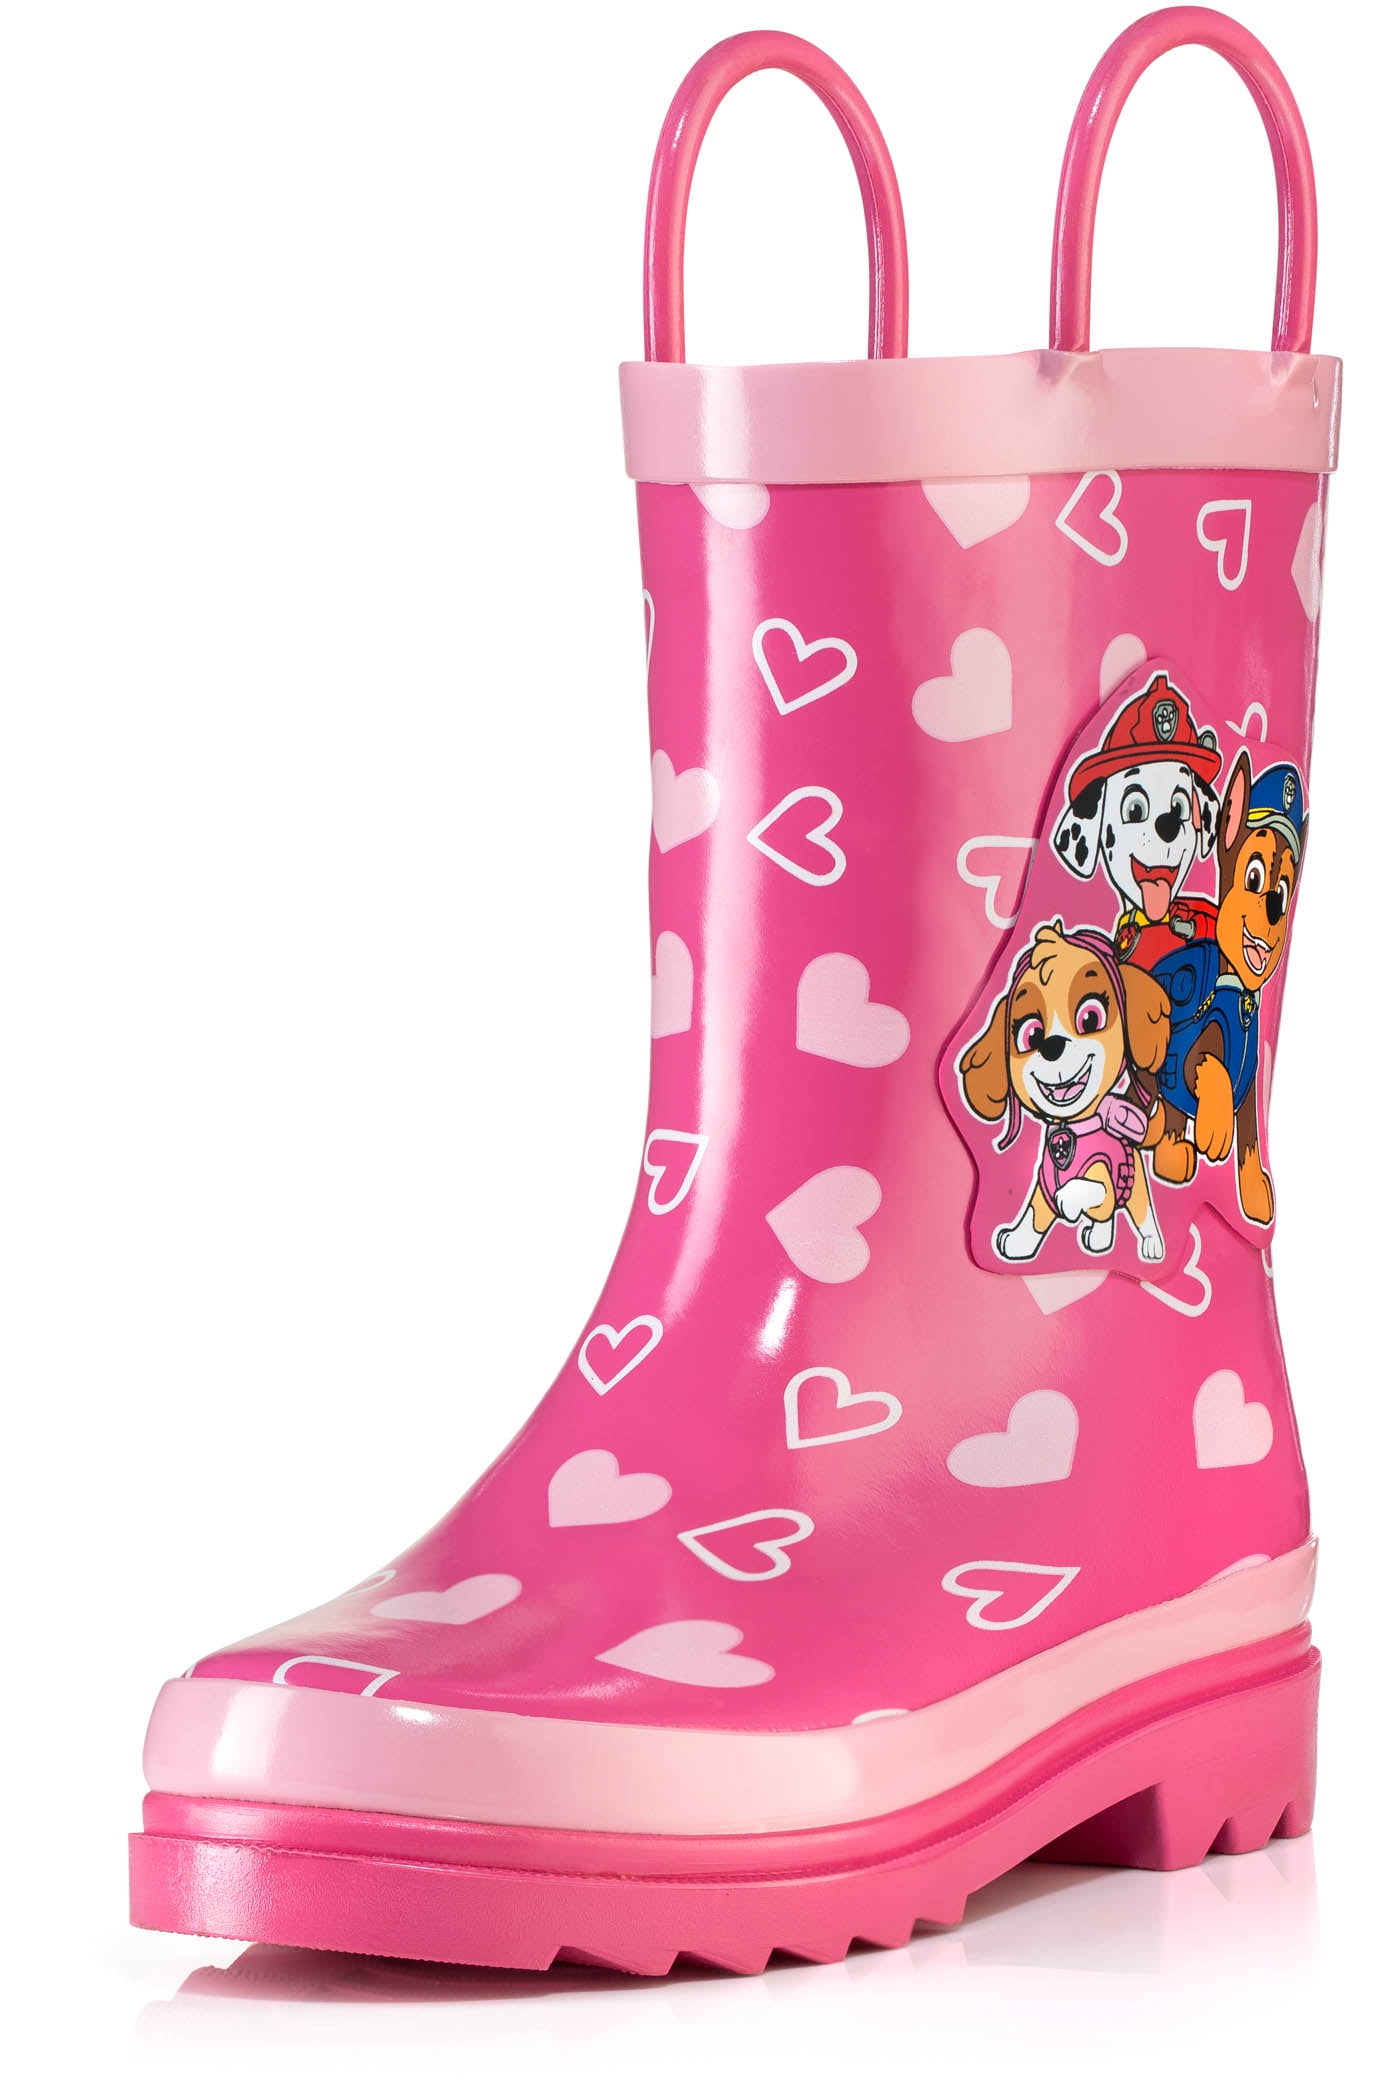 Nickelodeon Girls Paw Patrol Hearts Dressing Gown 